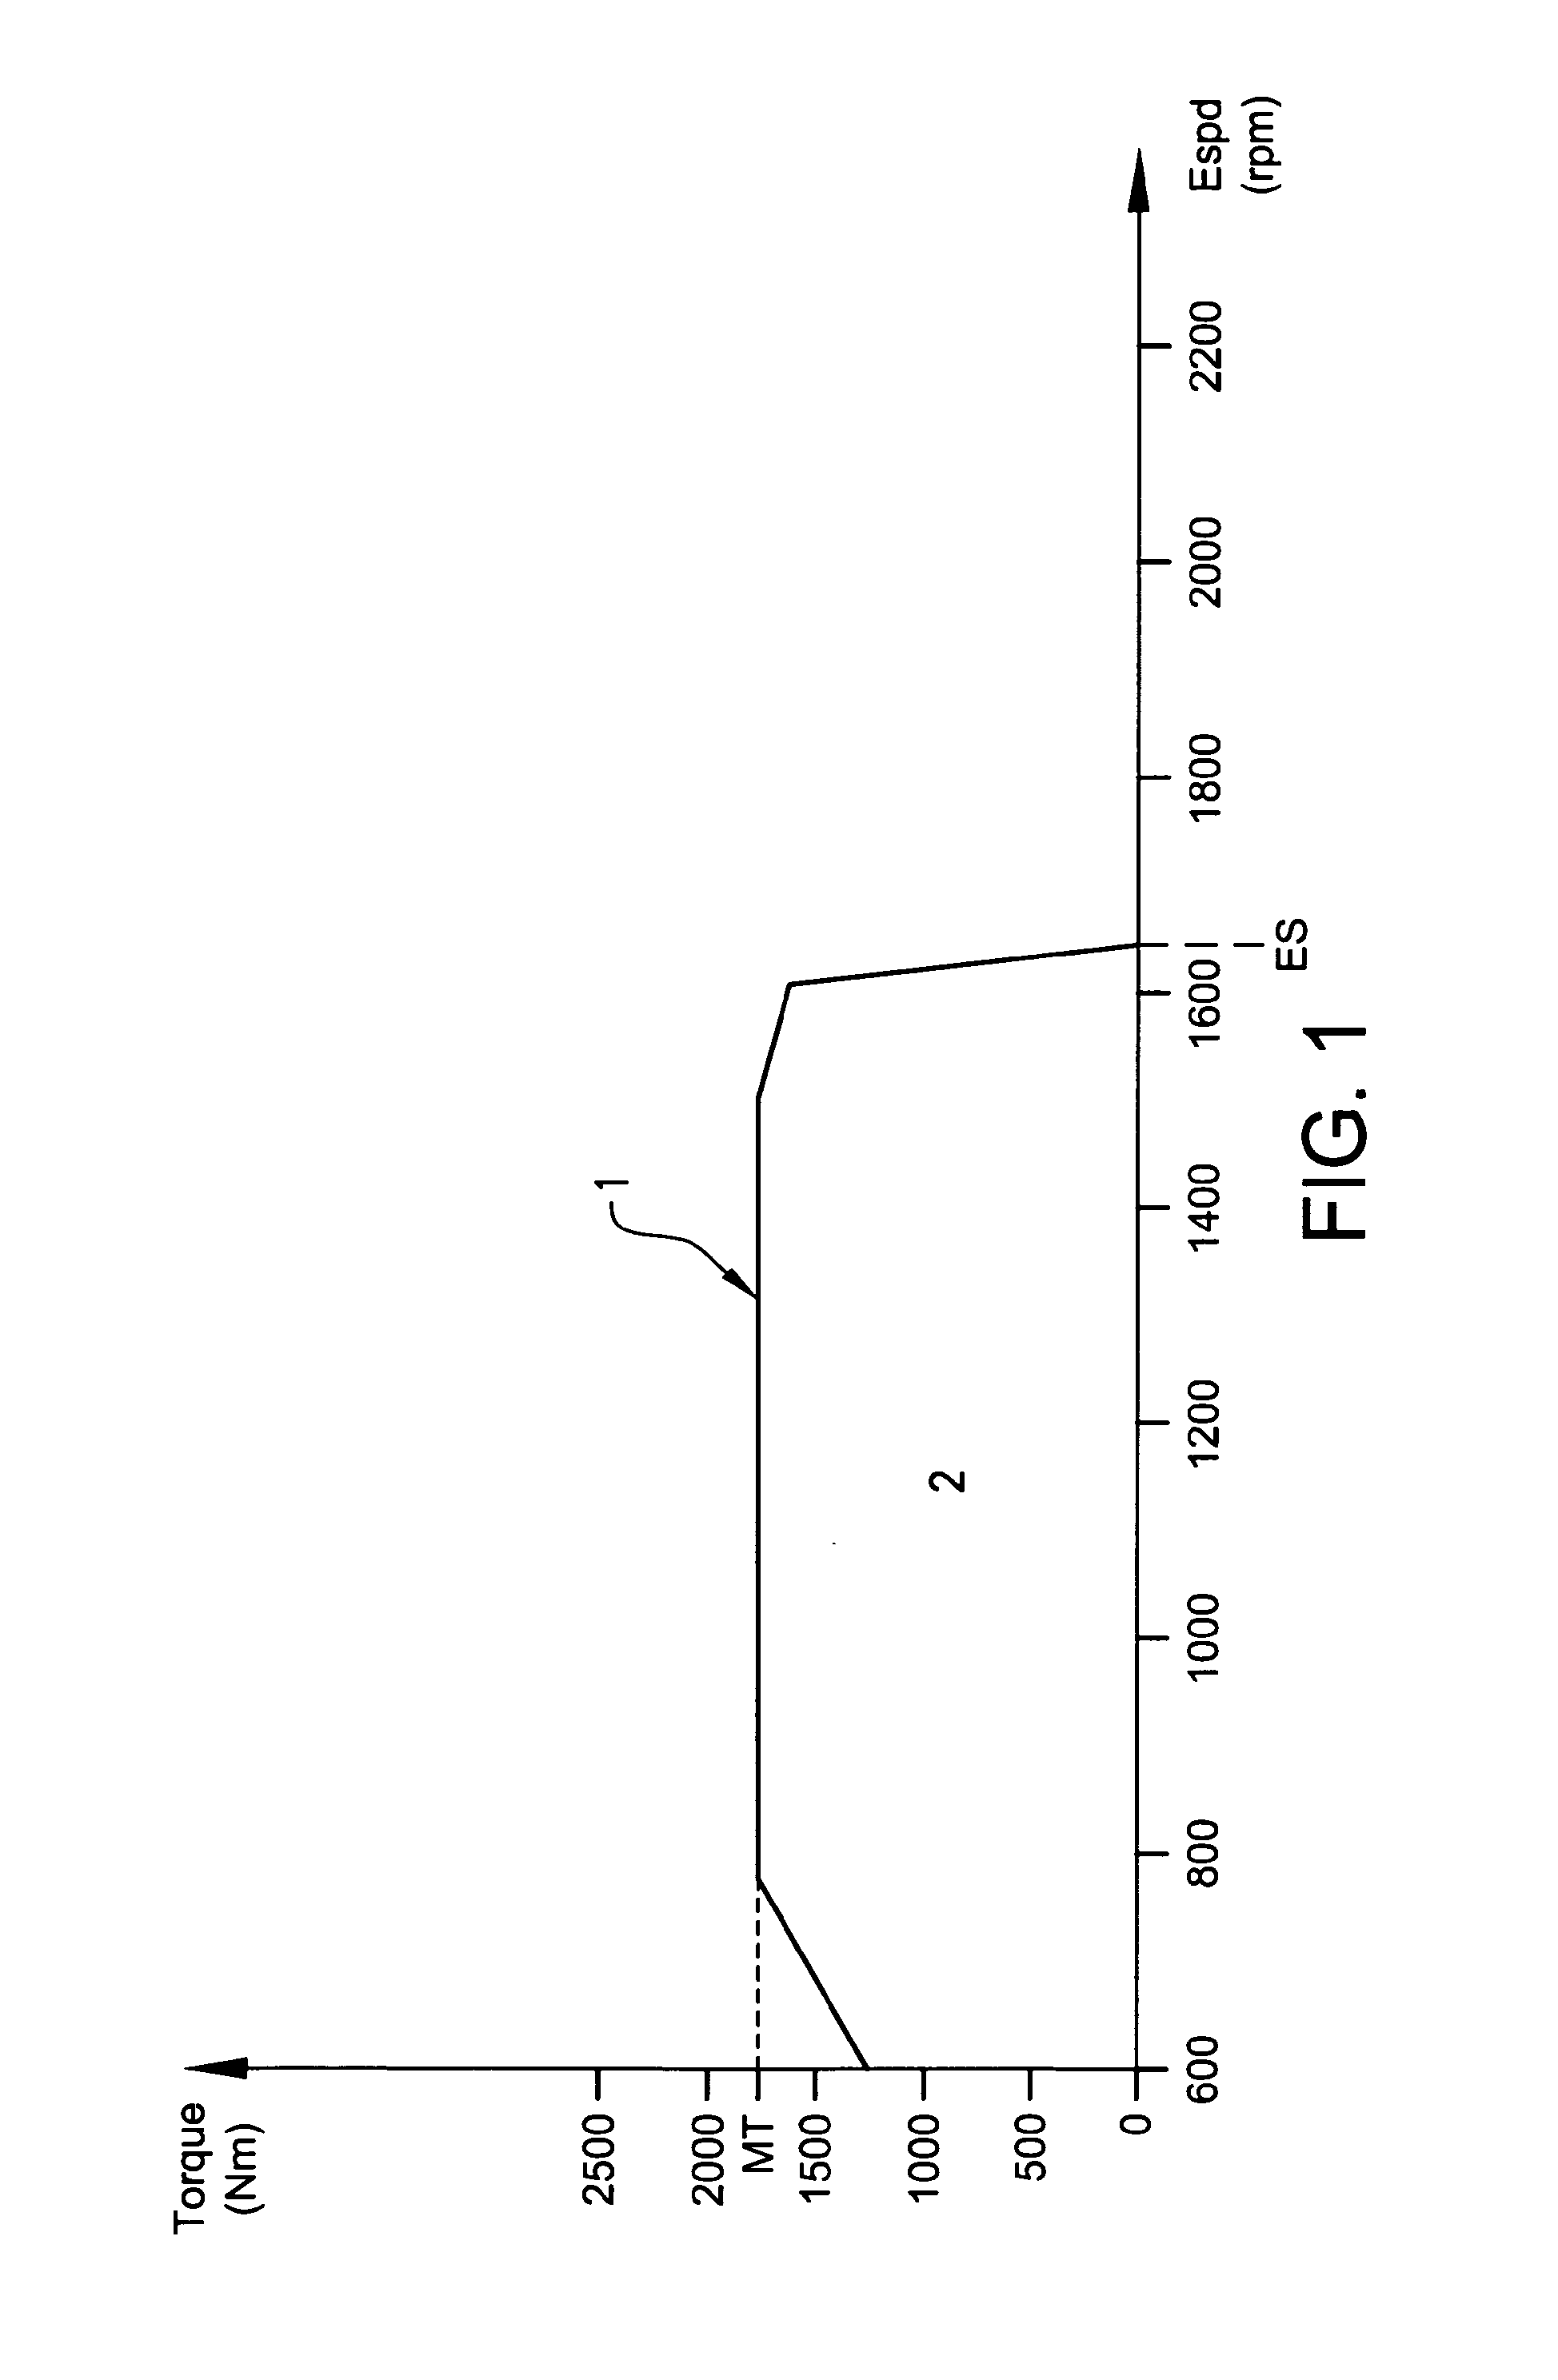 Method and apparatus for controlling an engine to achieve a boosted performance for a limited time